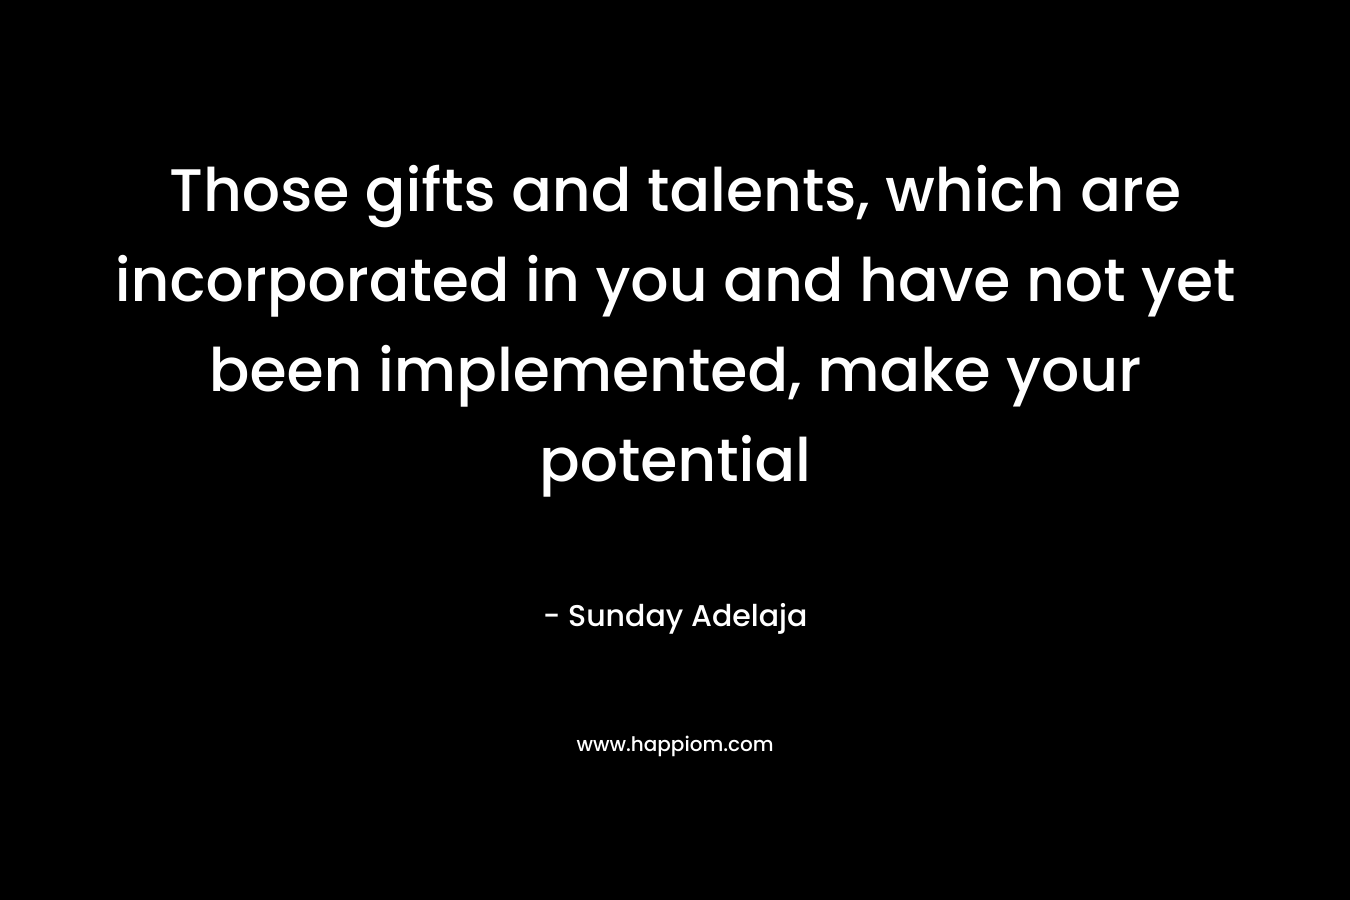 Those gifts and talents, which are incorporated in you and have not yet been implemented, make your potential